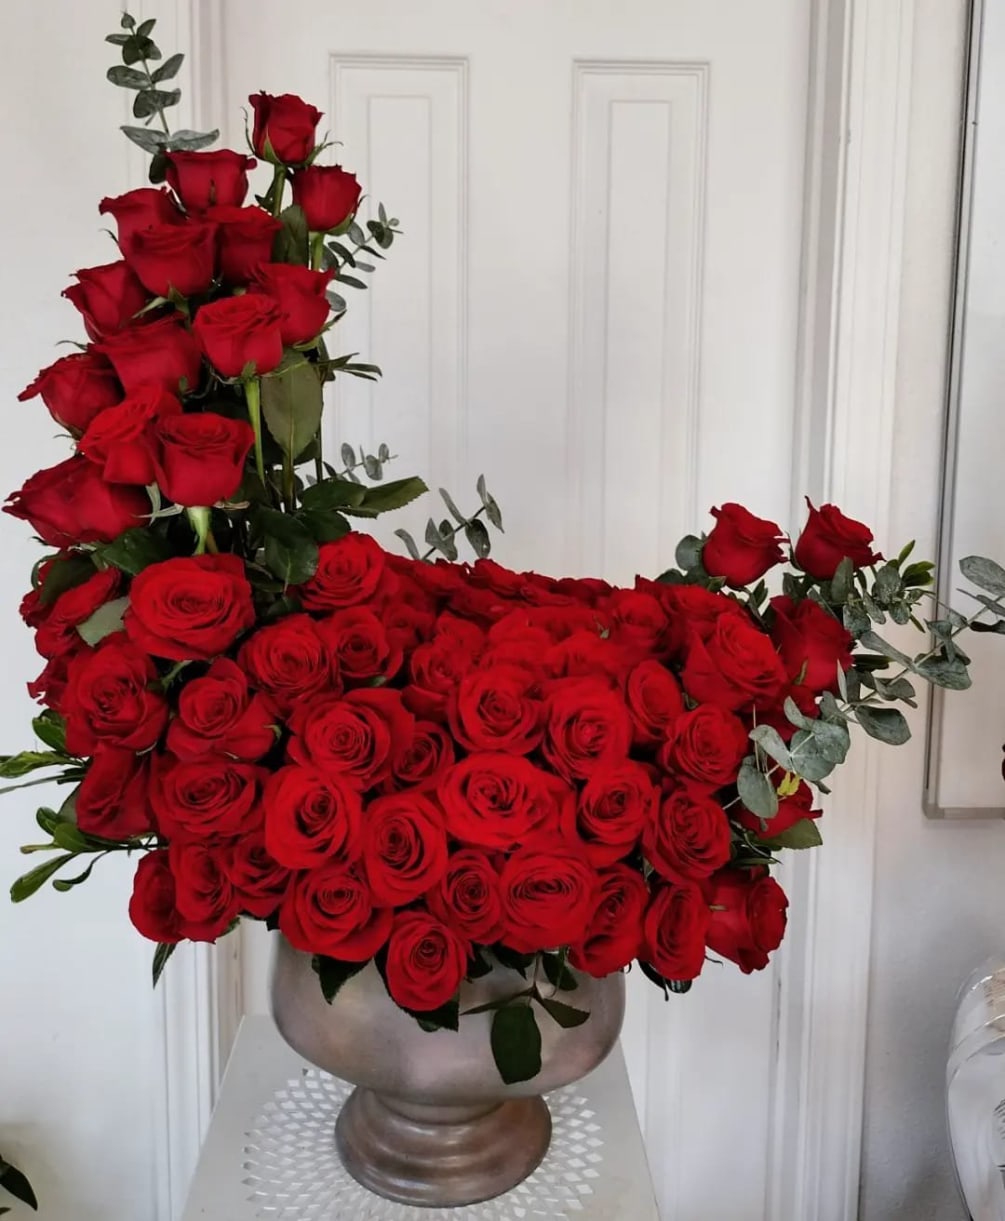 Make a bold, passionate statement with this stunning arrangement of roses arranged